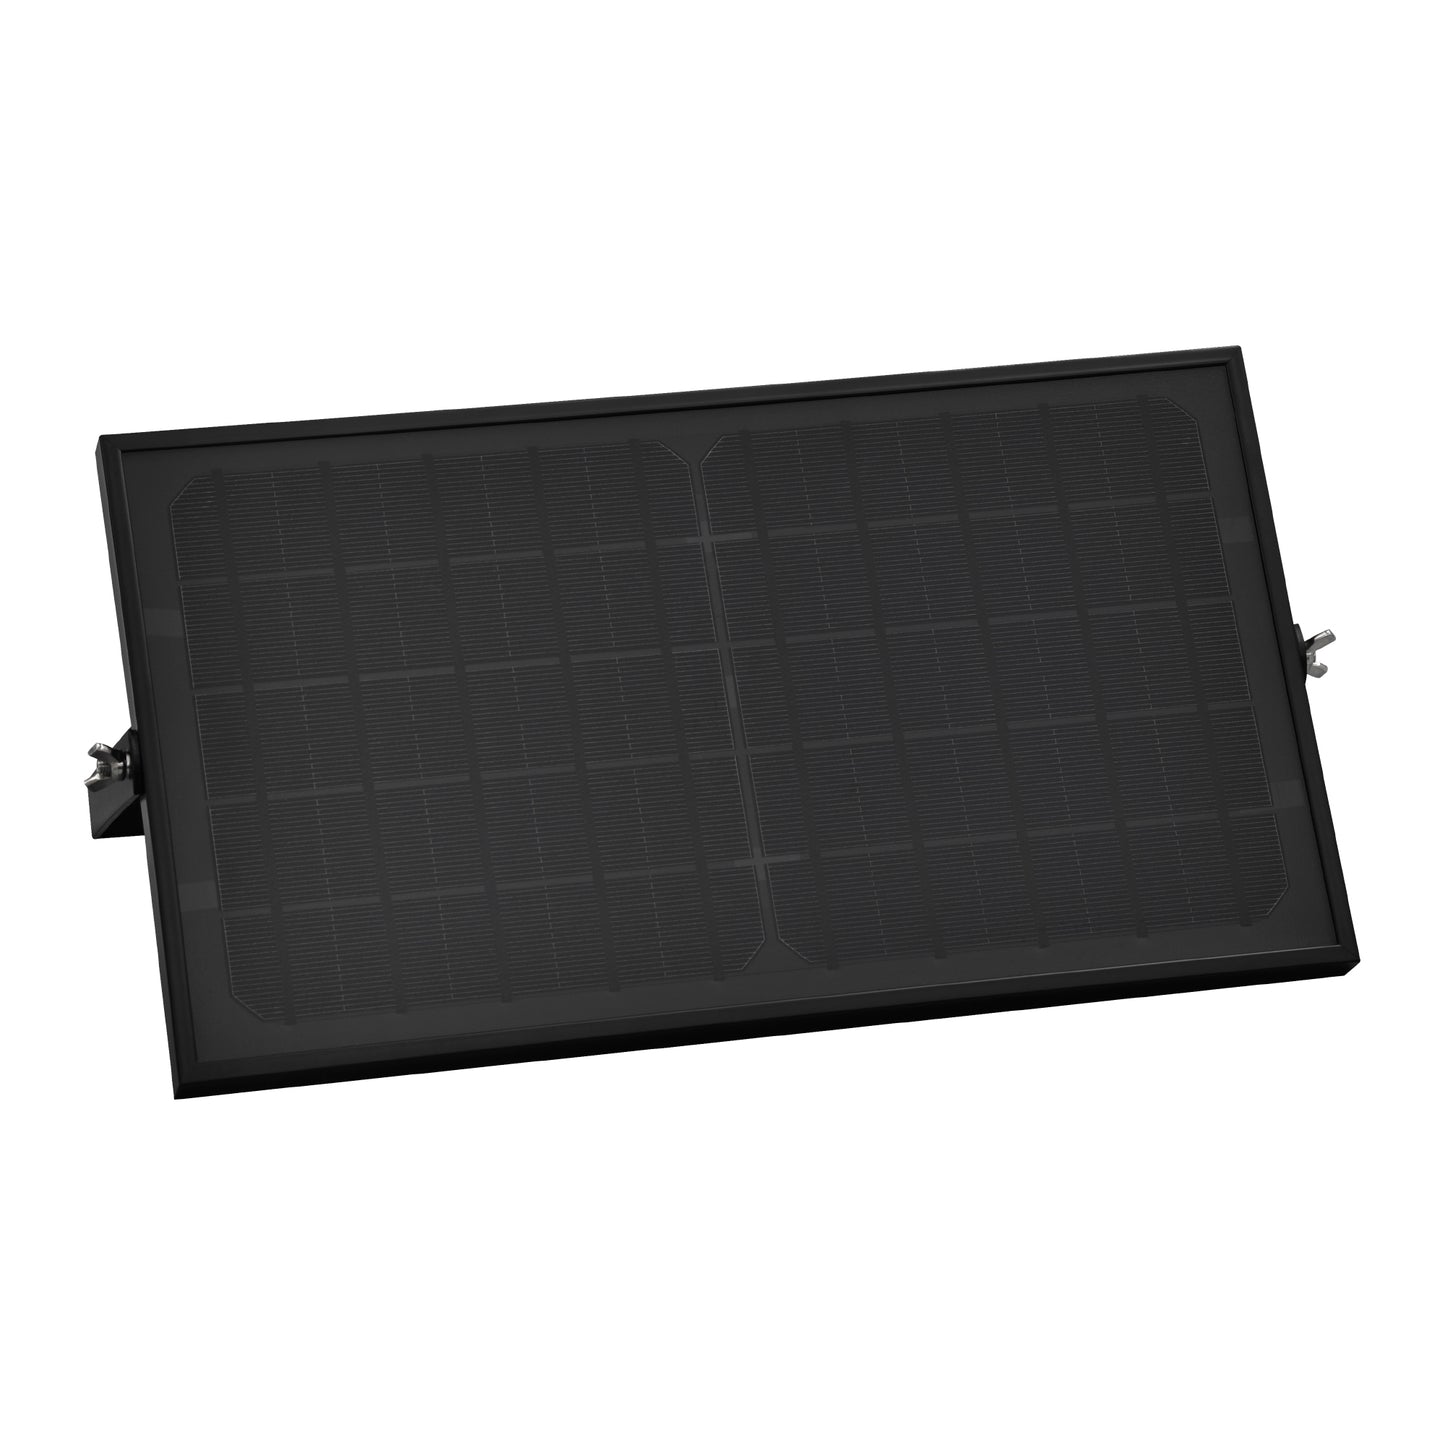 4-30W COLD BLACK RECHARGEABLE SOLAR LED PROJECTOR 